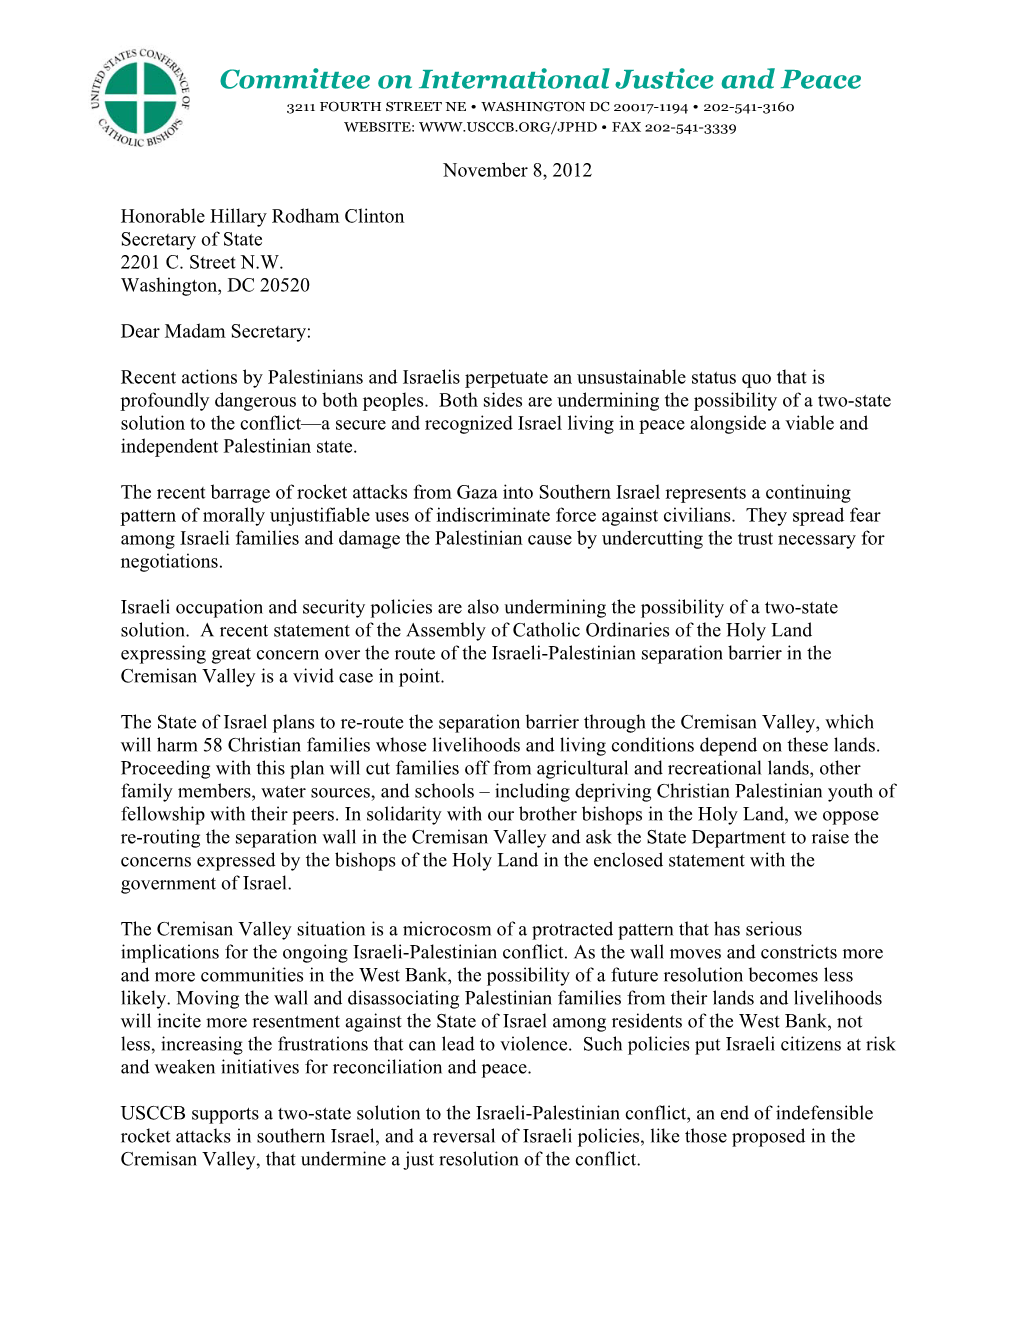 Letter to Secretary of State Clinton on Israel and Palestine